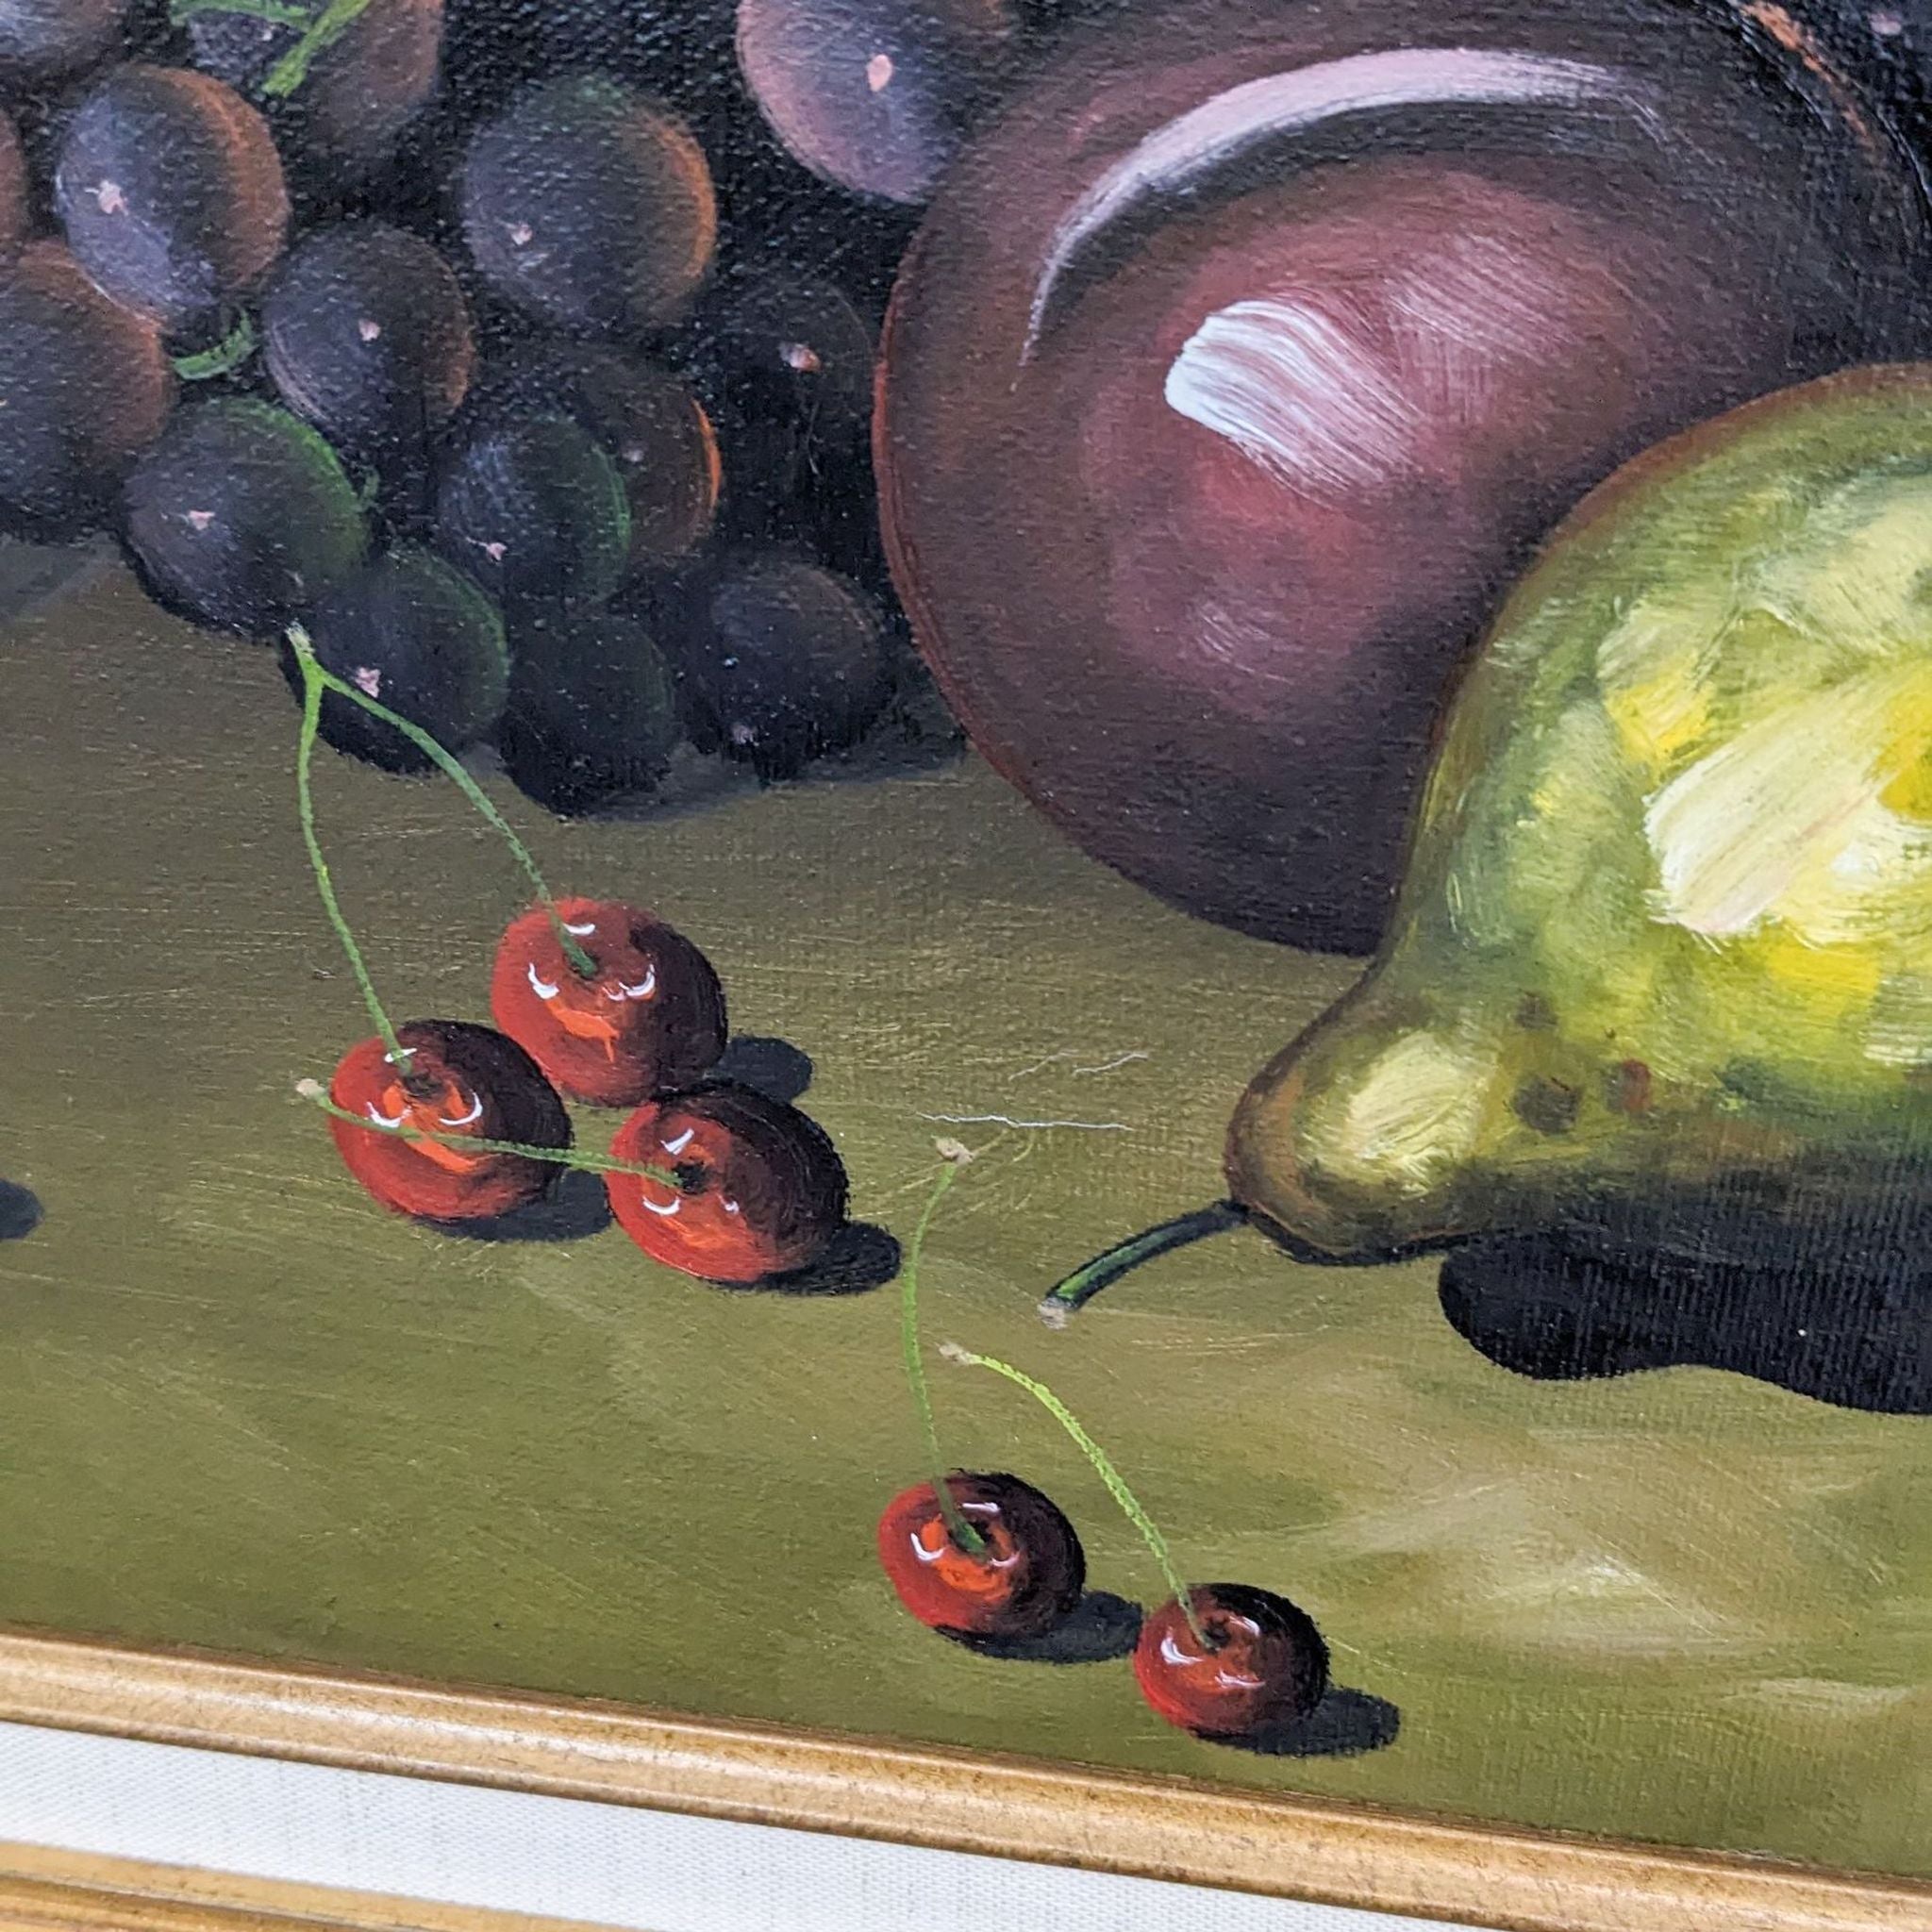 Alt text 2: Close-up of a still life painting showing textured details of grapes, cherries, and a pear, signed by artist Kance.